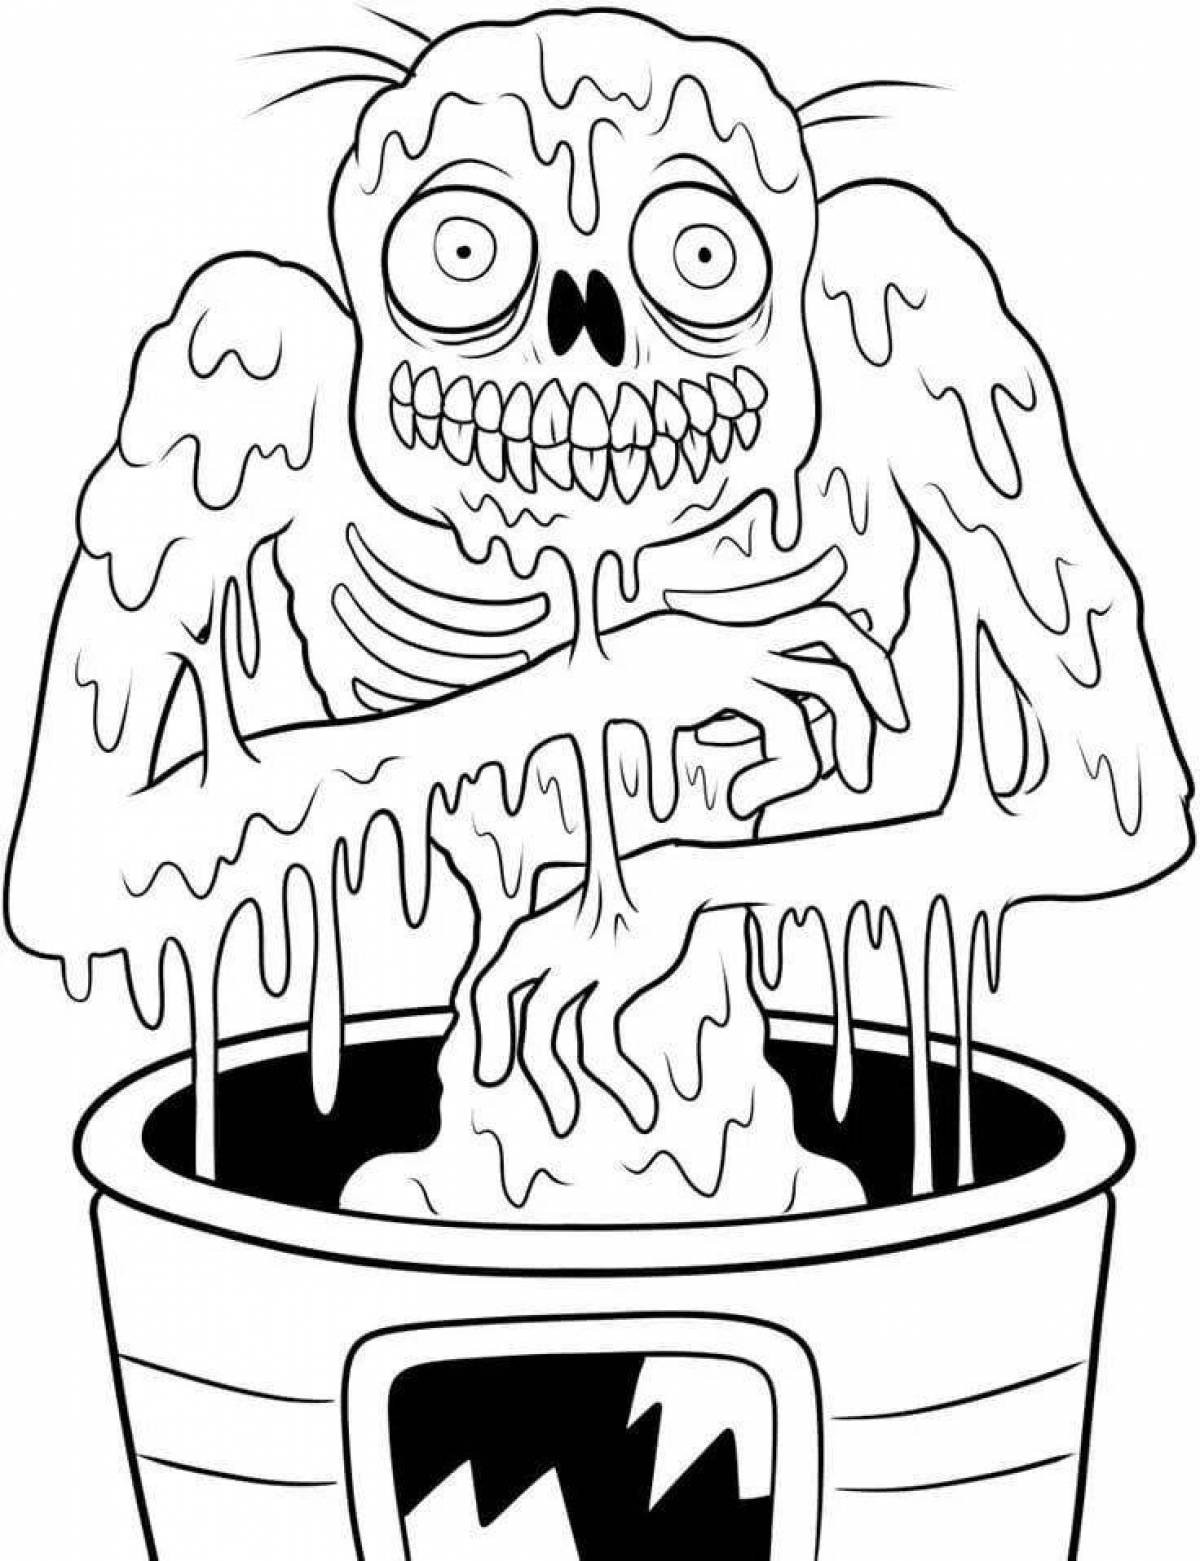 Sickening scary monsters coloring page